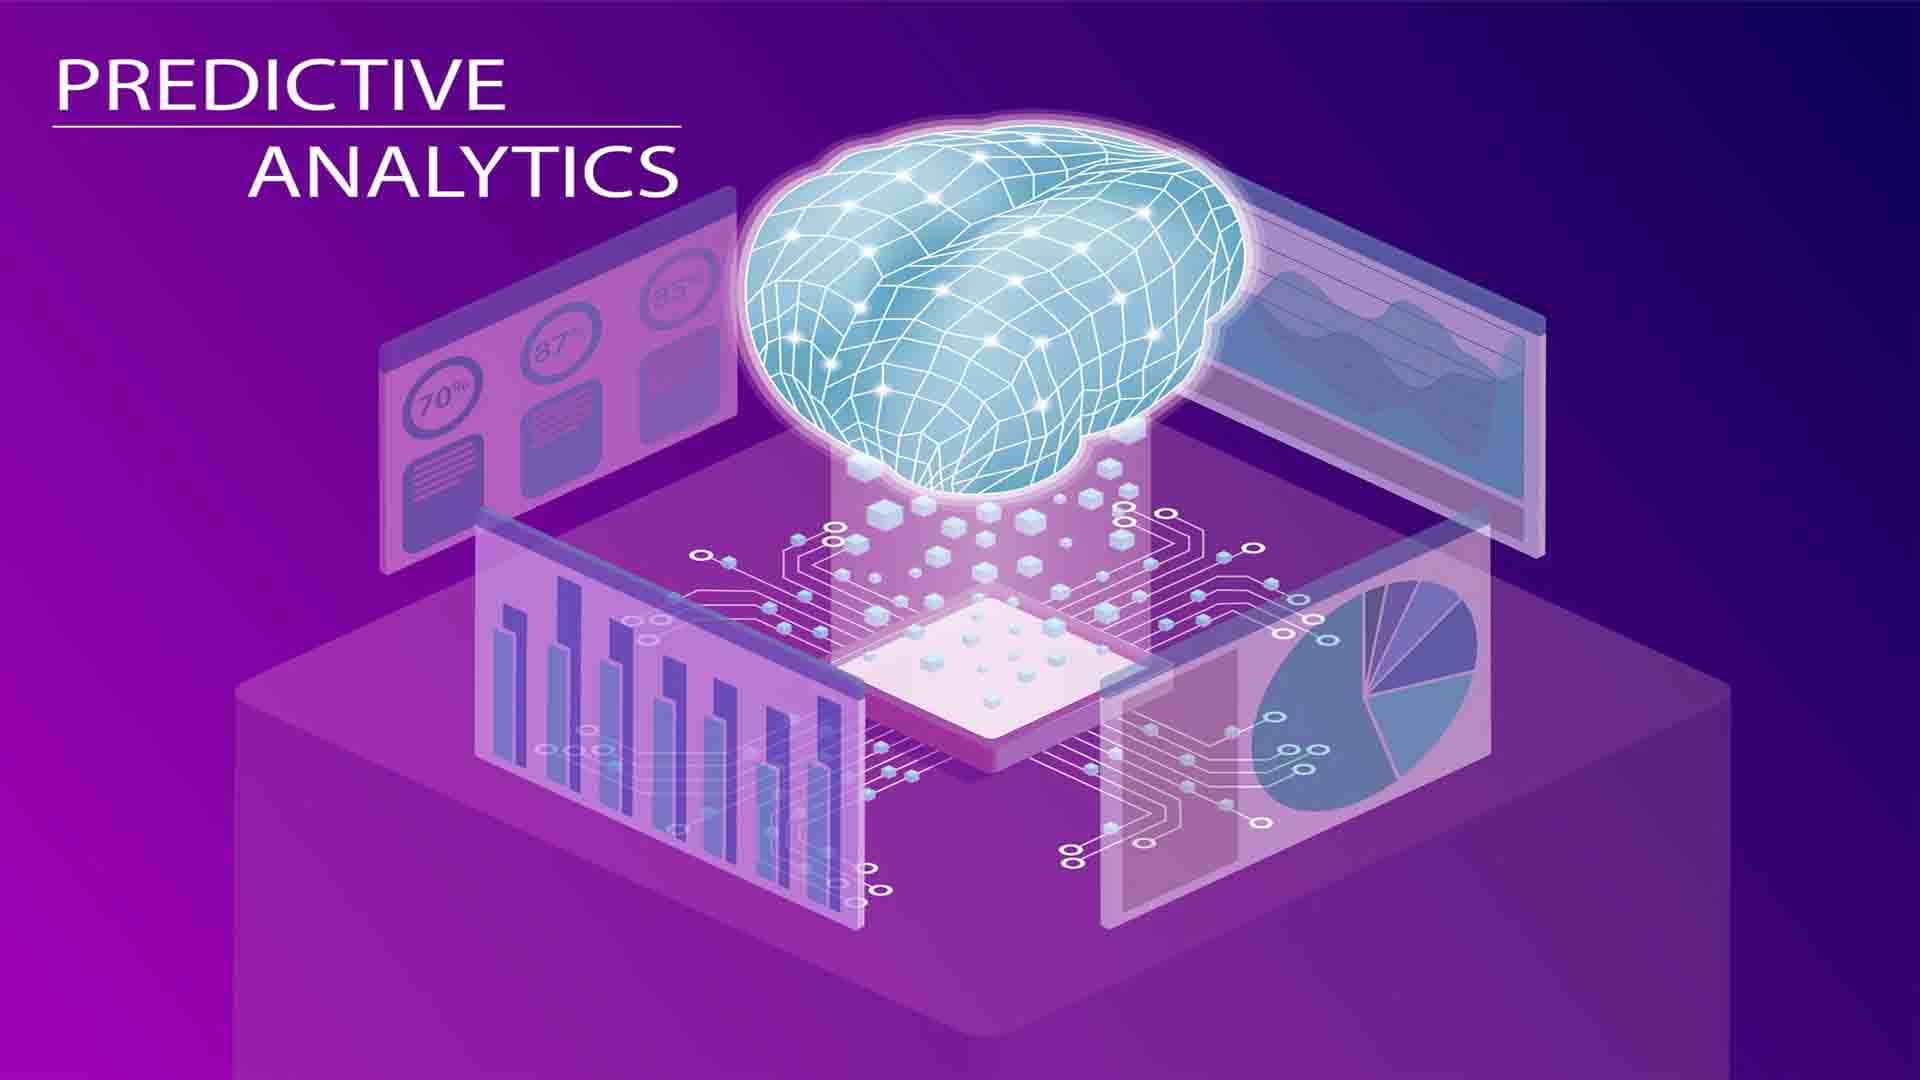 Marketing actions: how to use predictive analytics